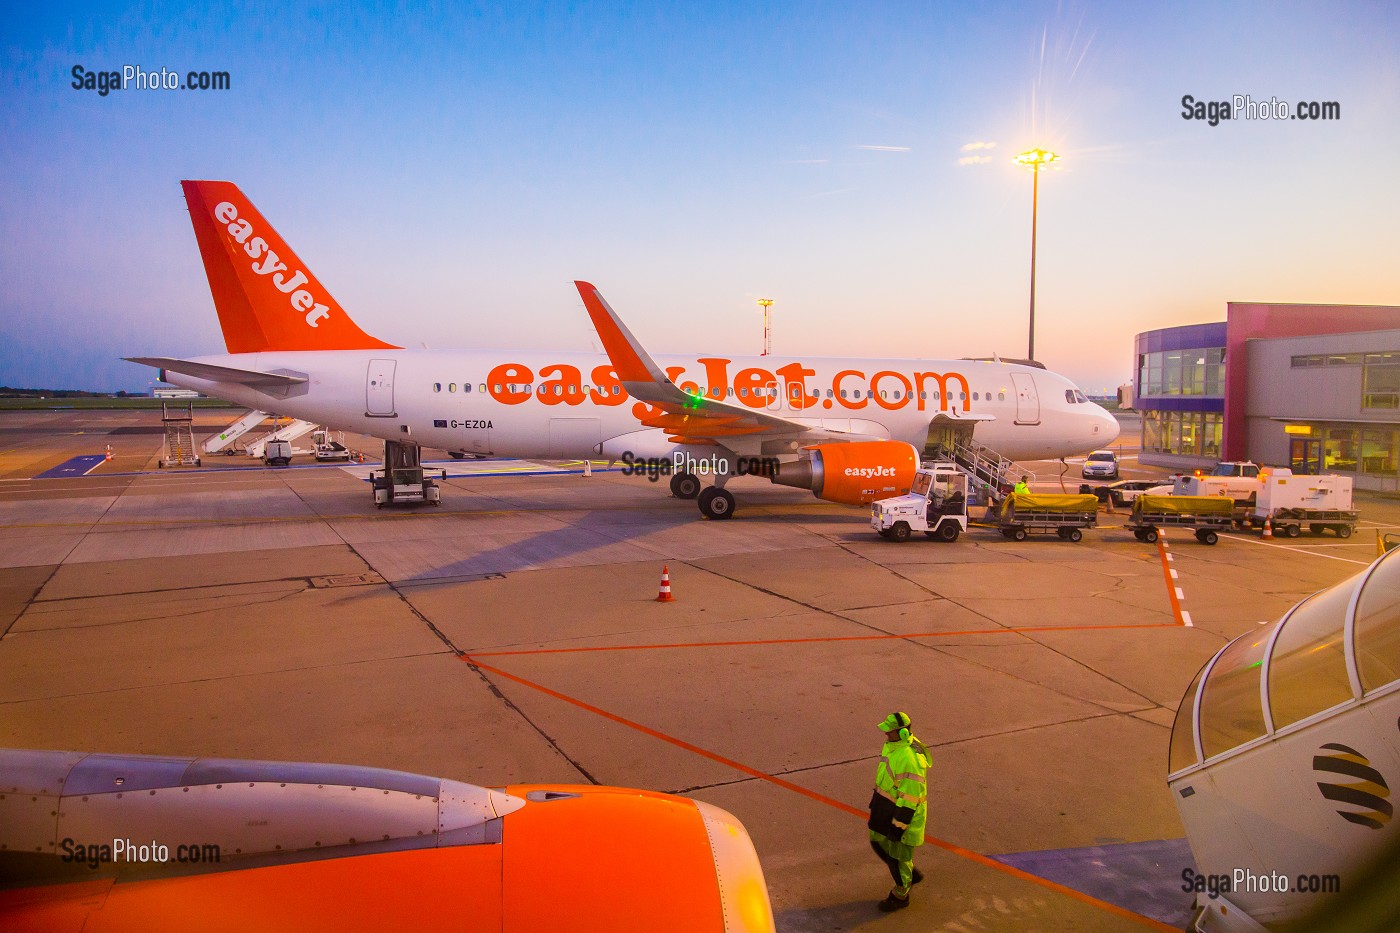 ILLUSTRATION COMPAGNIE LOW COST, EASY JET, BERLIN ALLEMAGNE